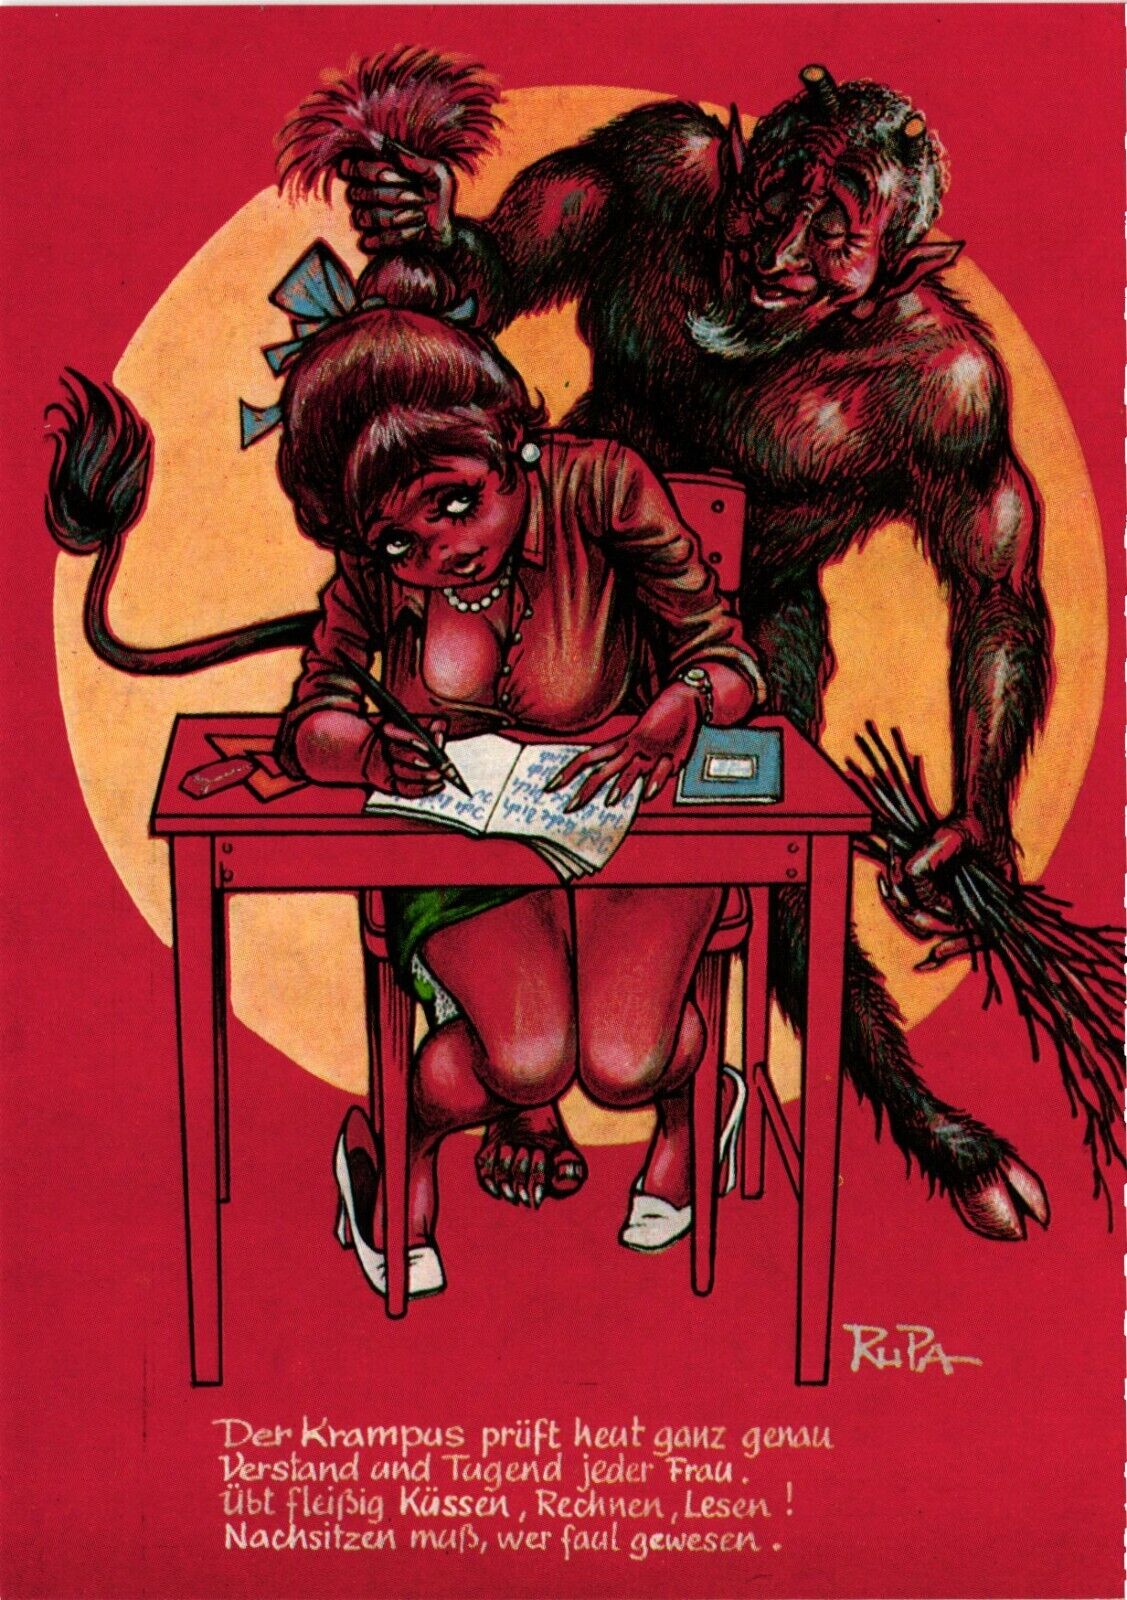 Krampus, Strict Krampus Teacher with a Sexy Student Lady, Christmas, 1990's, Pc.